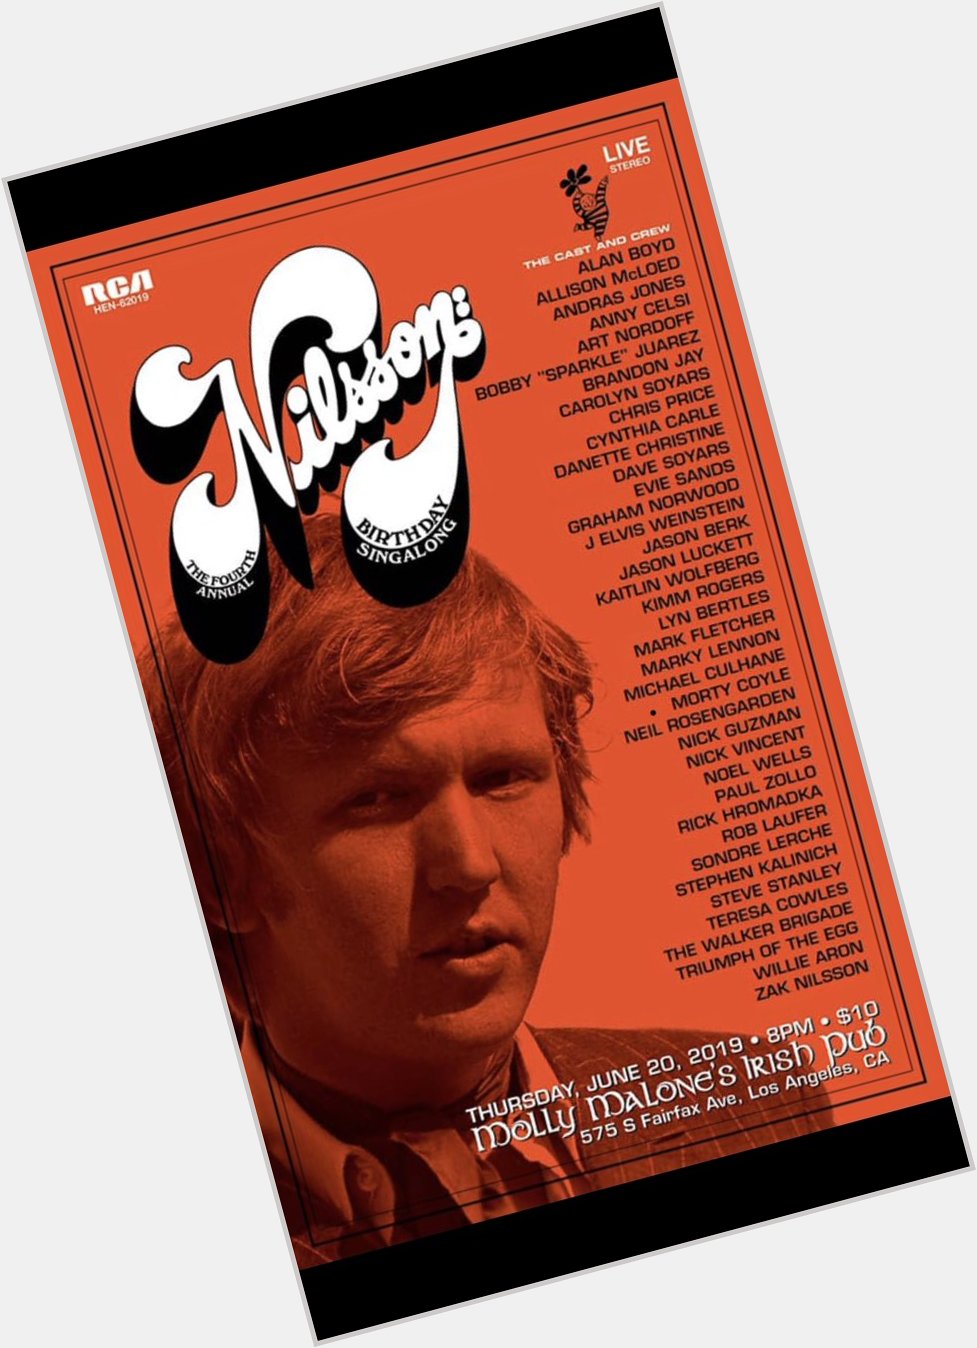 Happy Birthday Day to my old pal Harry Nilsson. 